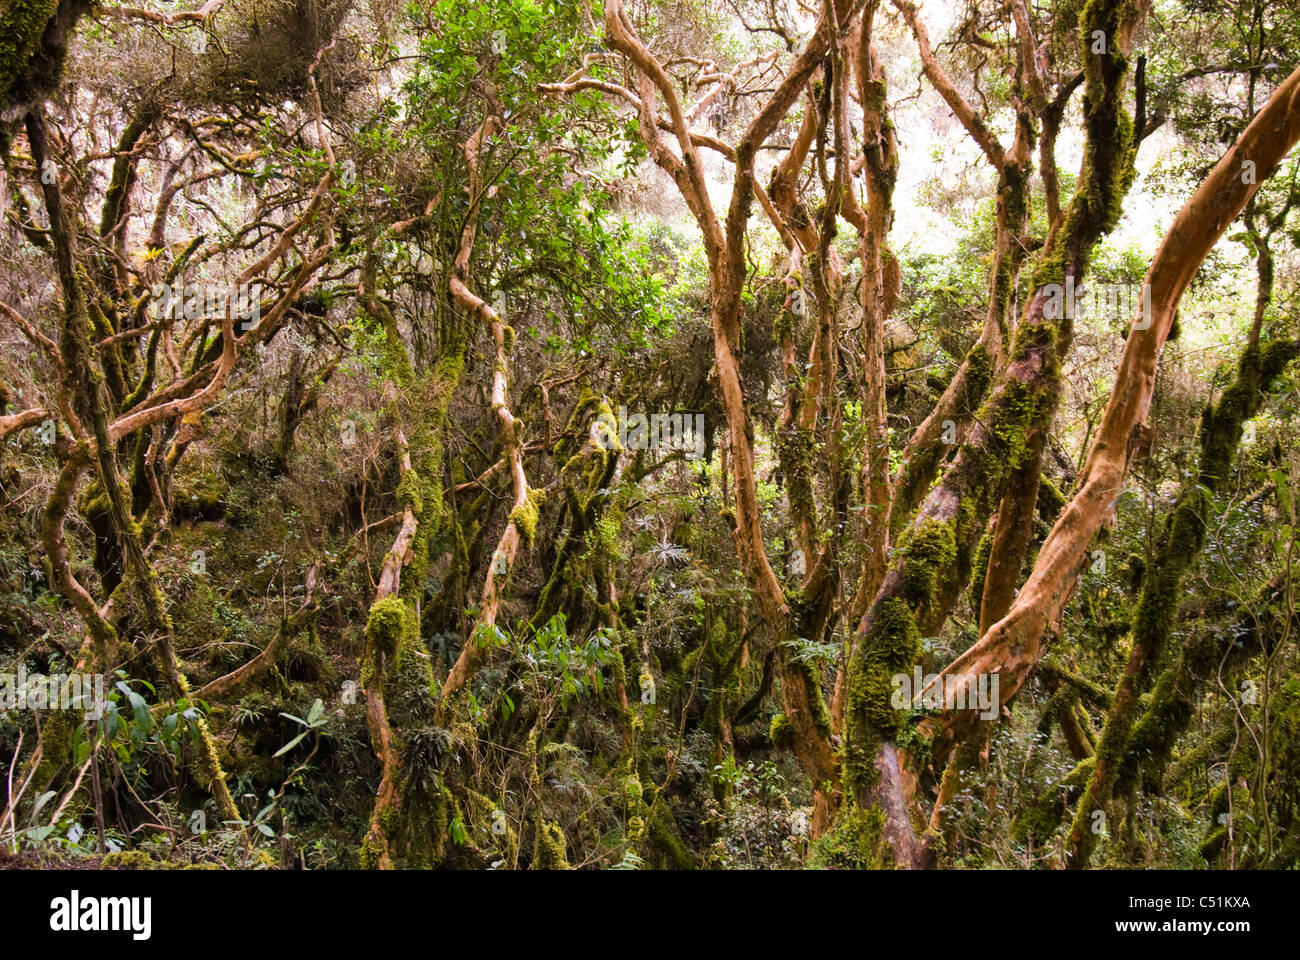 Native and endangered polylepis woodland (Polylepis sp.) along Inca Trail Peru Stock Photo